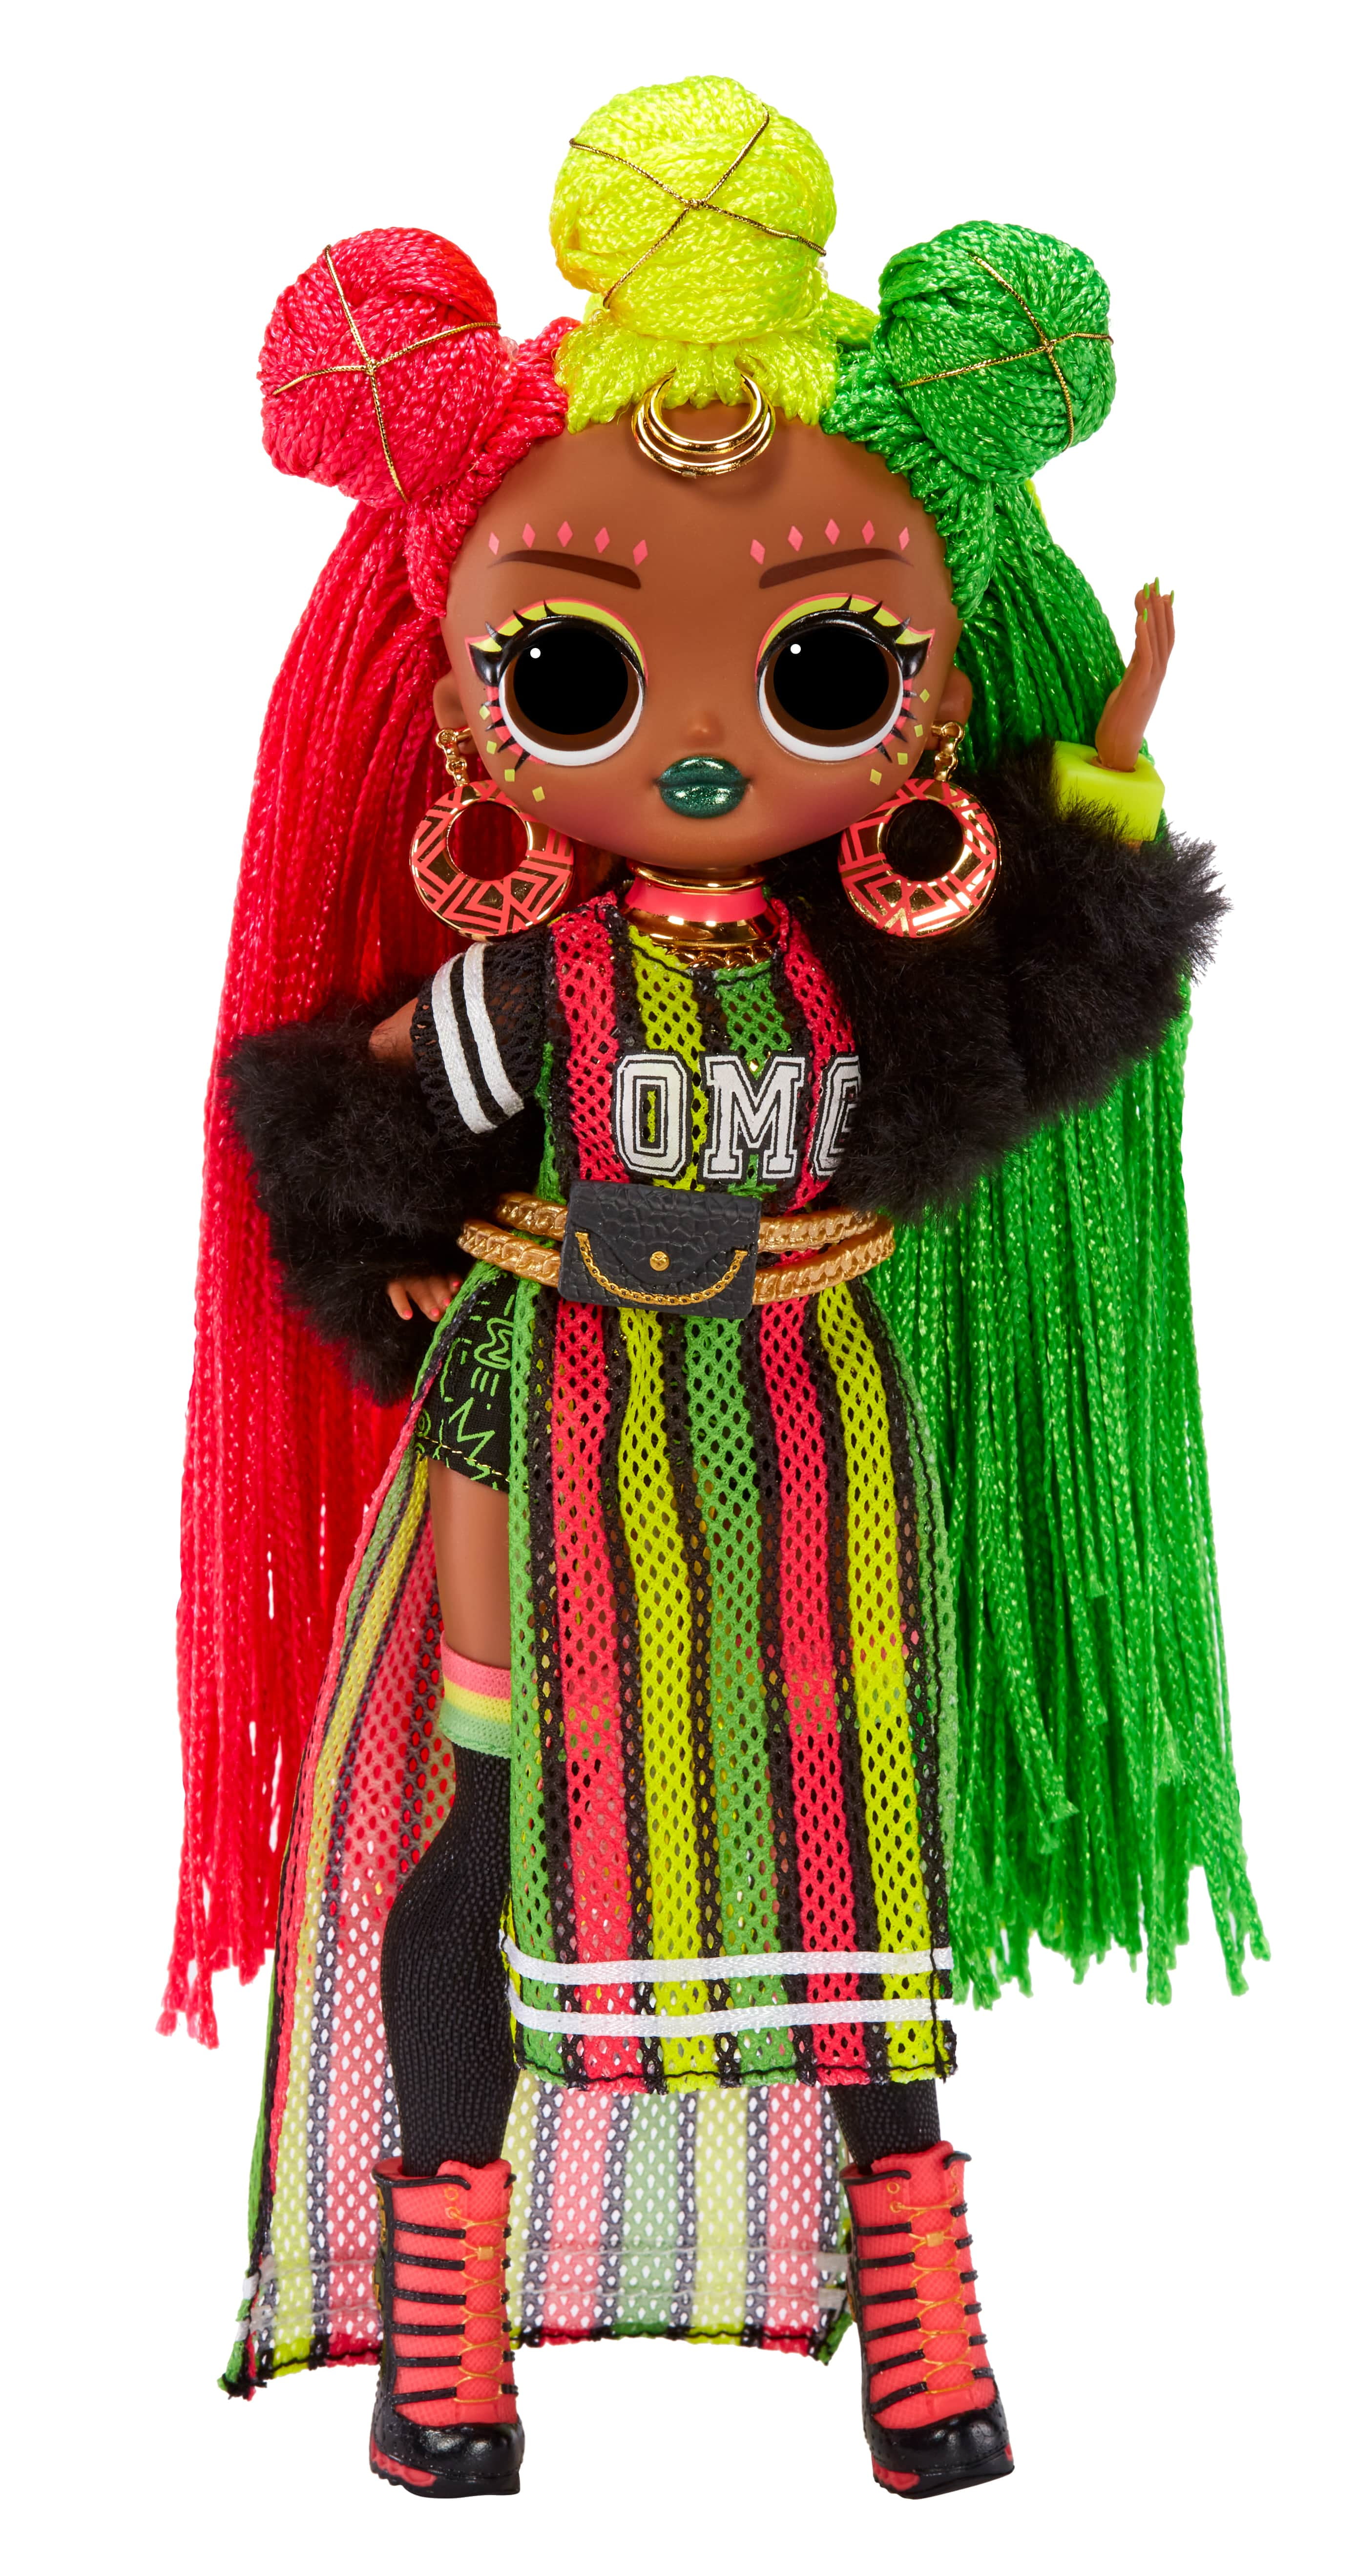 L.O.L Surprise! LOL Surprise OMG Queens Sways fashion doll with 20 Surprises Including Outfit and Accessories for Fashion Toy Girls Ages 3 and up, 10-inch doll